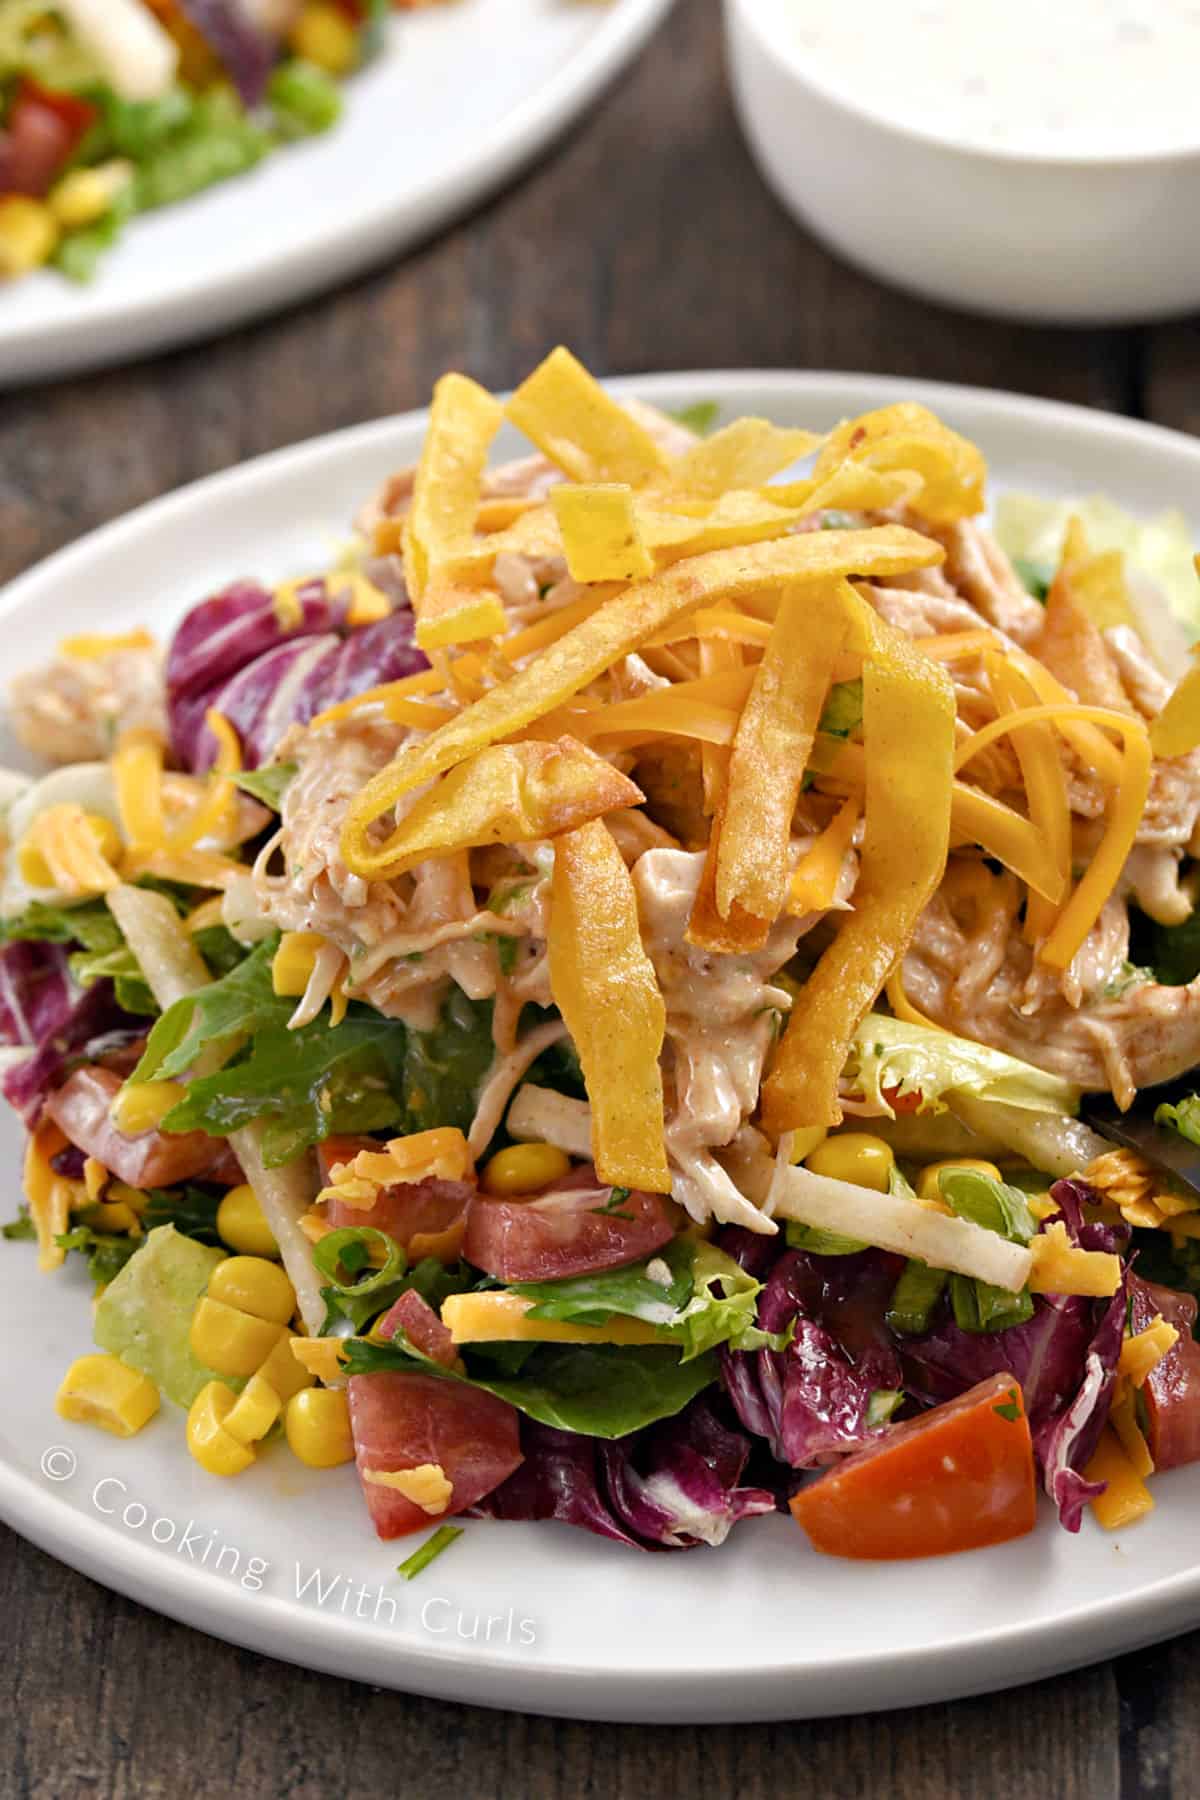 Mixed greens, tomato, corn, jicama strips, chicken, and tortilla strips piled up on a plate with a bowl of dressing in the background. 